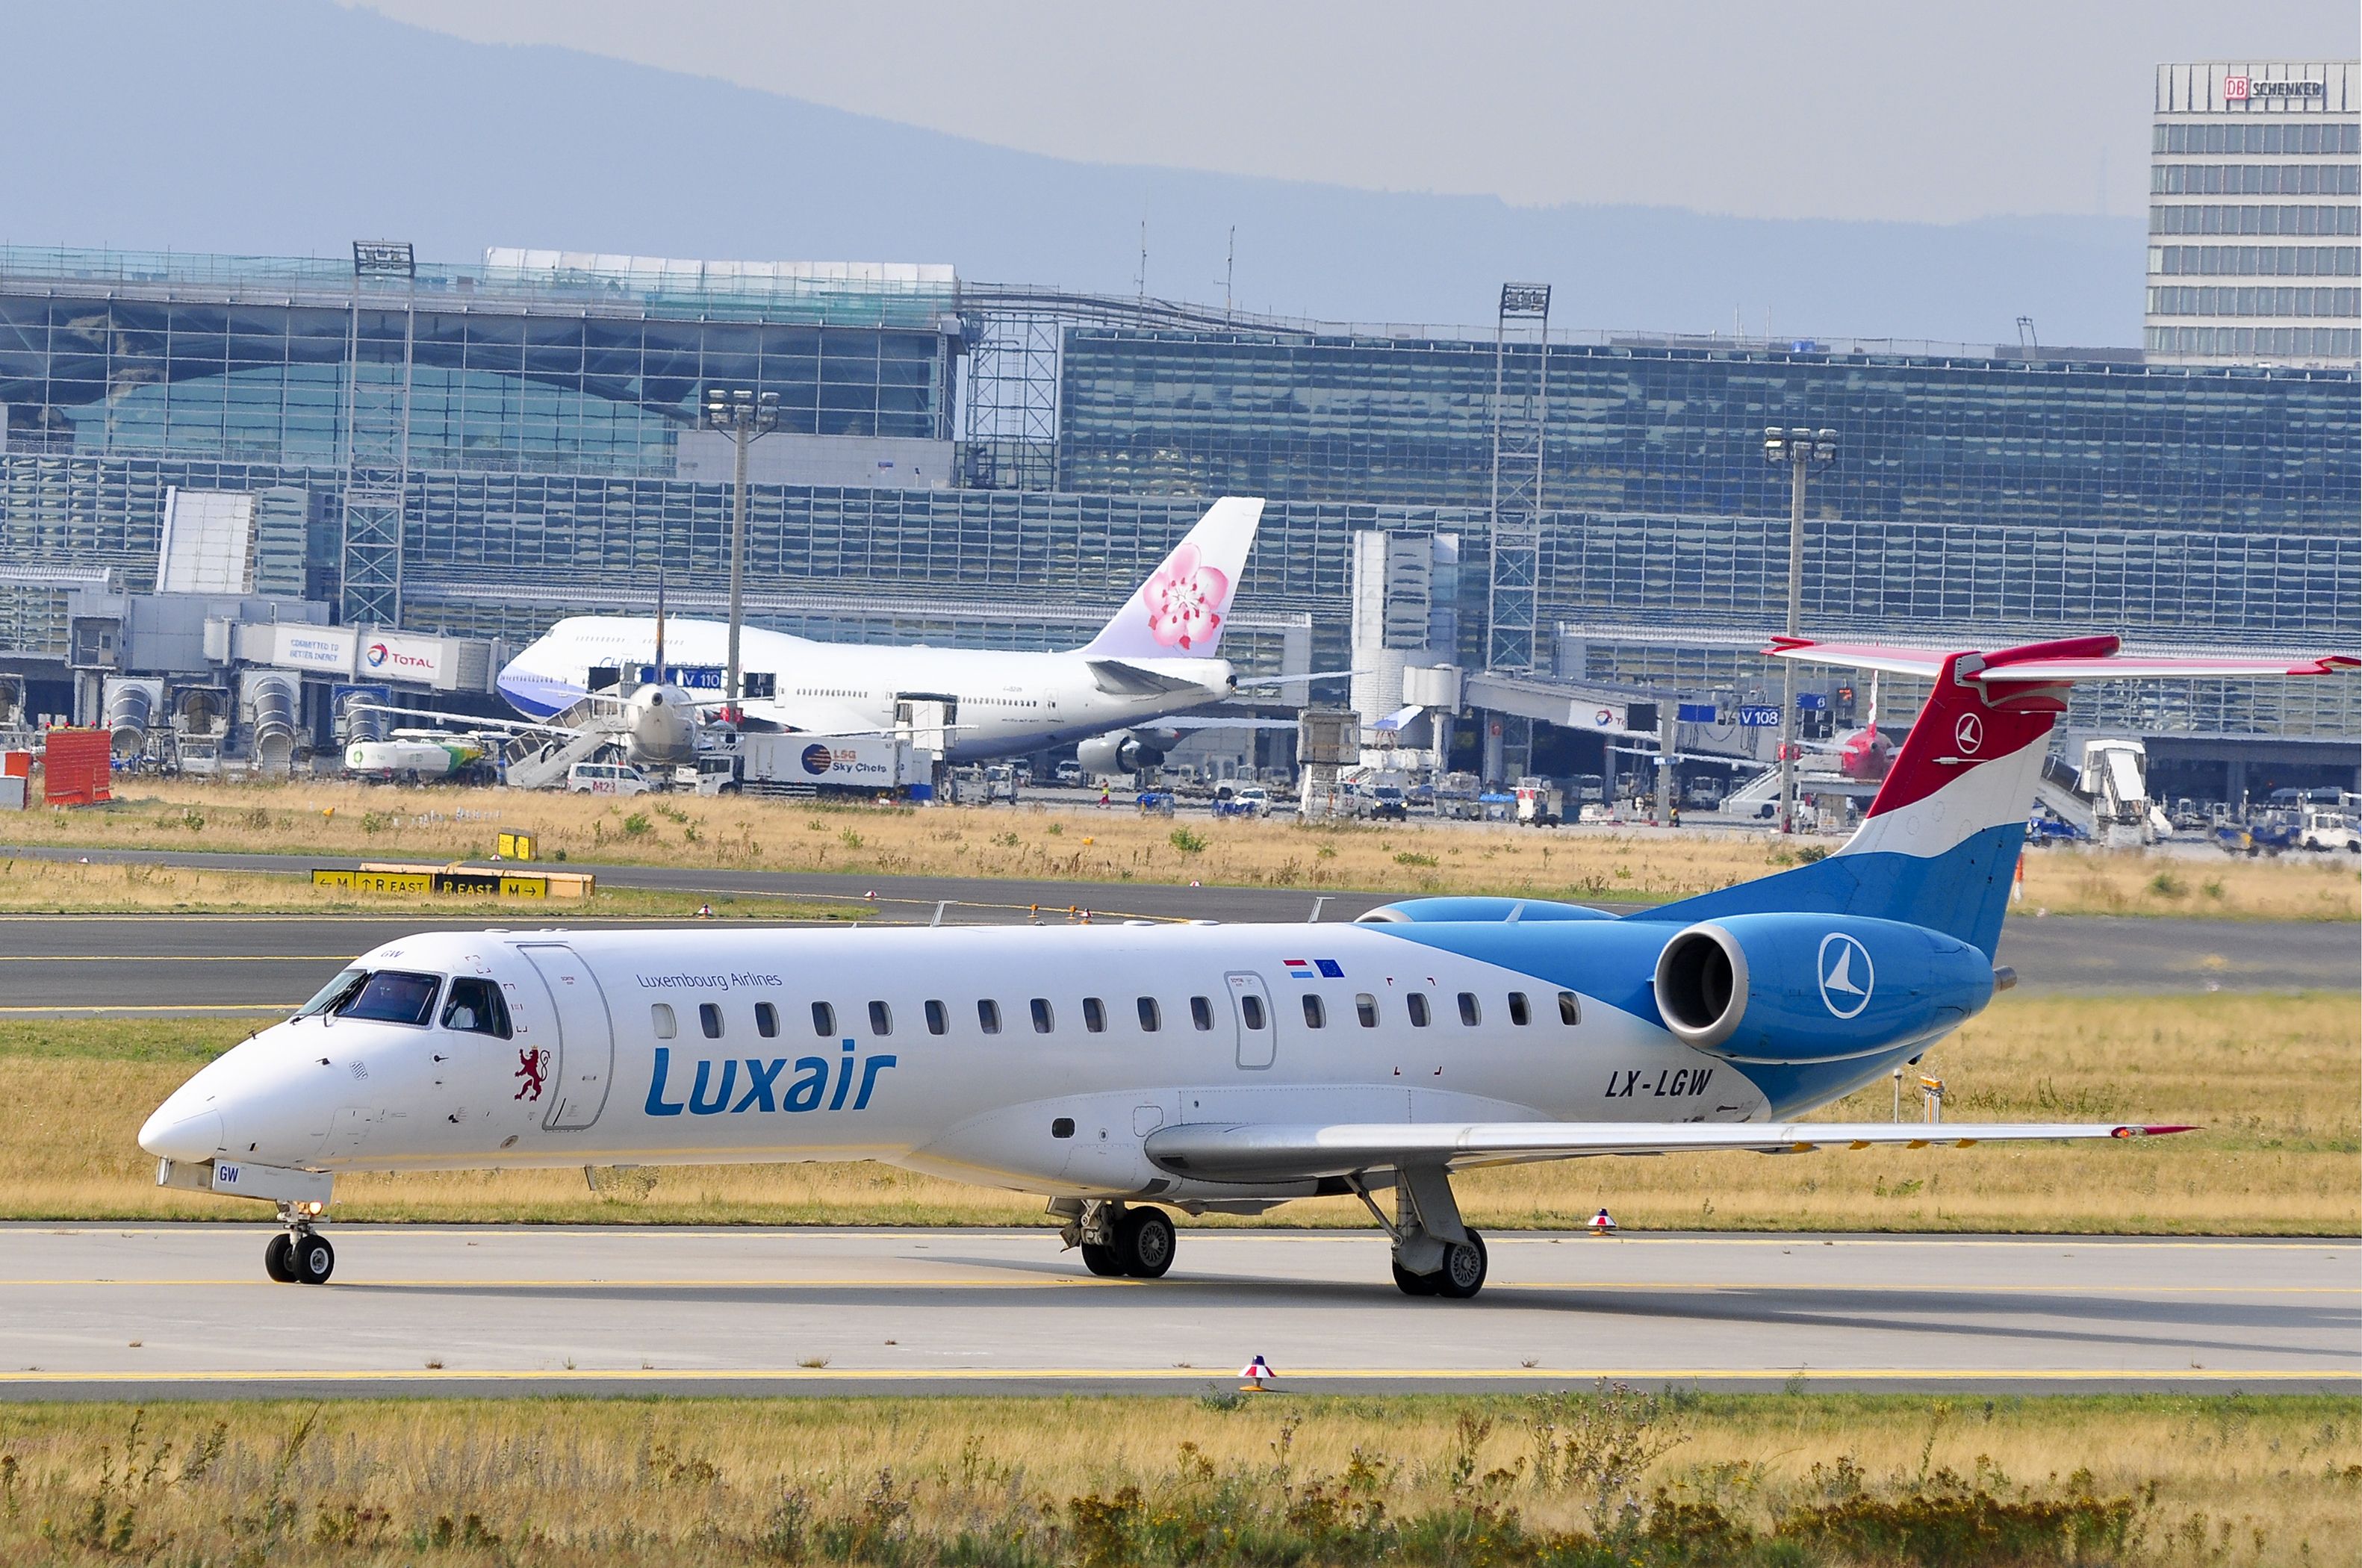 A Luxair Embraer ERJ-145 on the taxiway In Frankfurt.